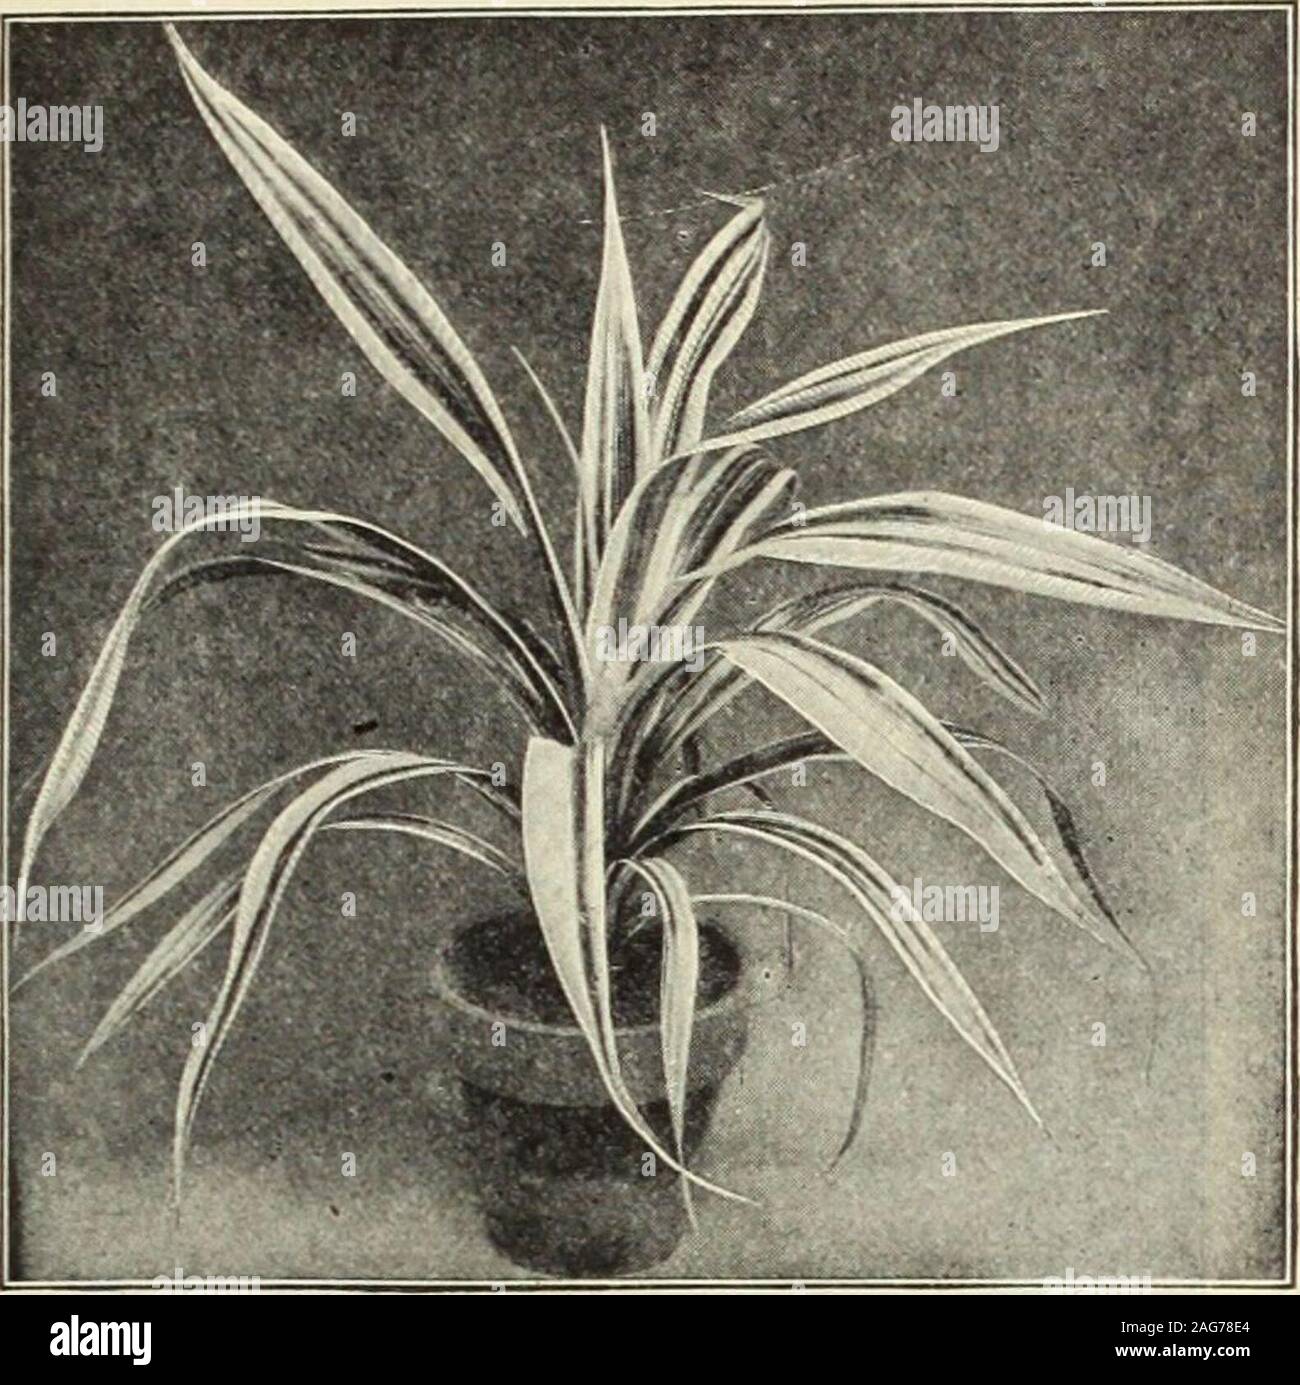 . Dreer's 1913 garden book. HEMRTADREER-PHIIADELPMIA VkIMGARDEM^-GREENHOUSE PLANTS 167. Pandanus Veitchi. OTAHEITE ORANGE. The best of the oranges for pot cuture. It is of dwarf, bushy habit, andbears a profusion of fragrant flowersand edible fruit. Strong plants, 25cts. each. PANAX. Pretty shrubby plants for thewarm conservatory, of neat, com-pact growth. Balfouri. Bold foliage of richivy-green, abundantly splashedwith creamy-white, the edge ofthe leaf entirely white. 50c. each (iracillima. Deep green, deeply-cut foliage. 50 cts. each.Monstrosum aureum. Deep green fol age, with delicate go Stock Photo